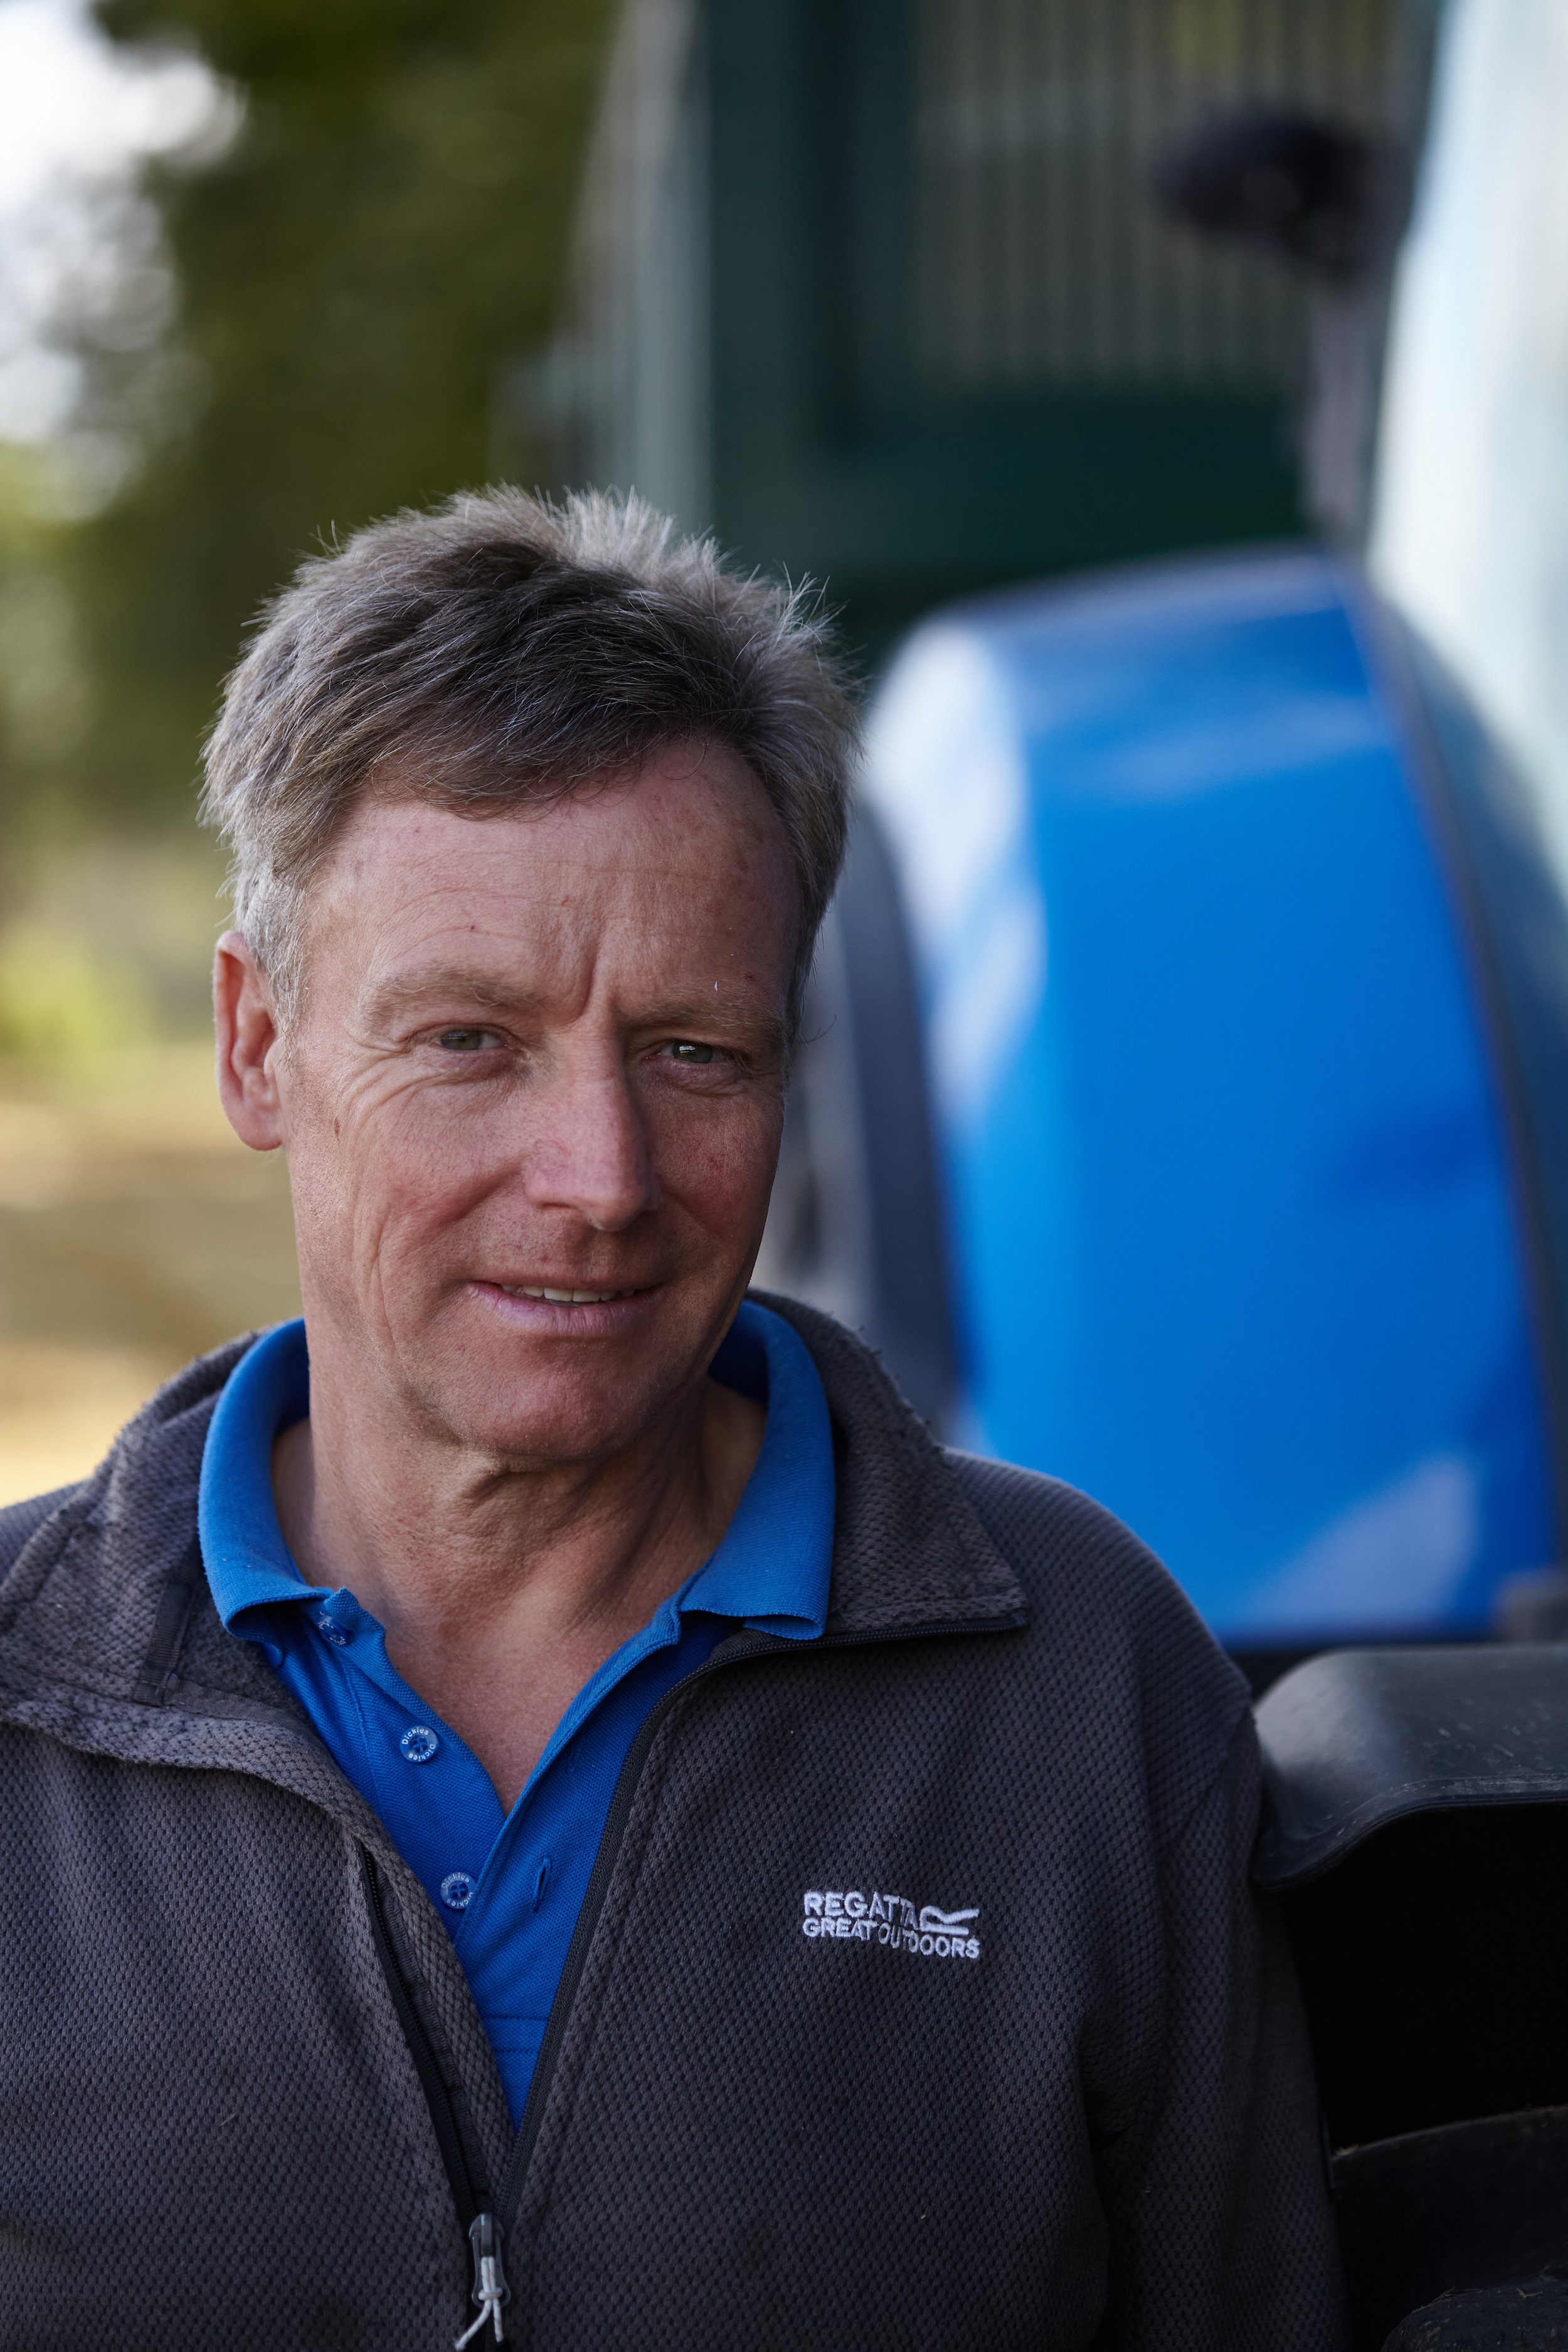 Headshot by Hatty Frances Bell taken in Norfolk of farmer standing next to his blue tractor in a field of cut wheat